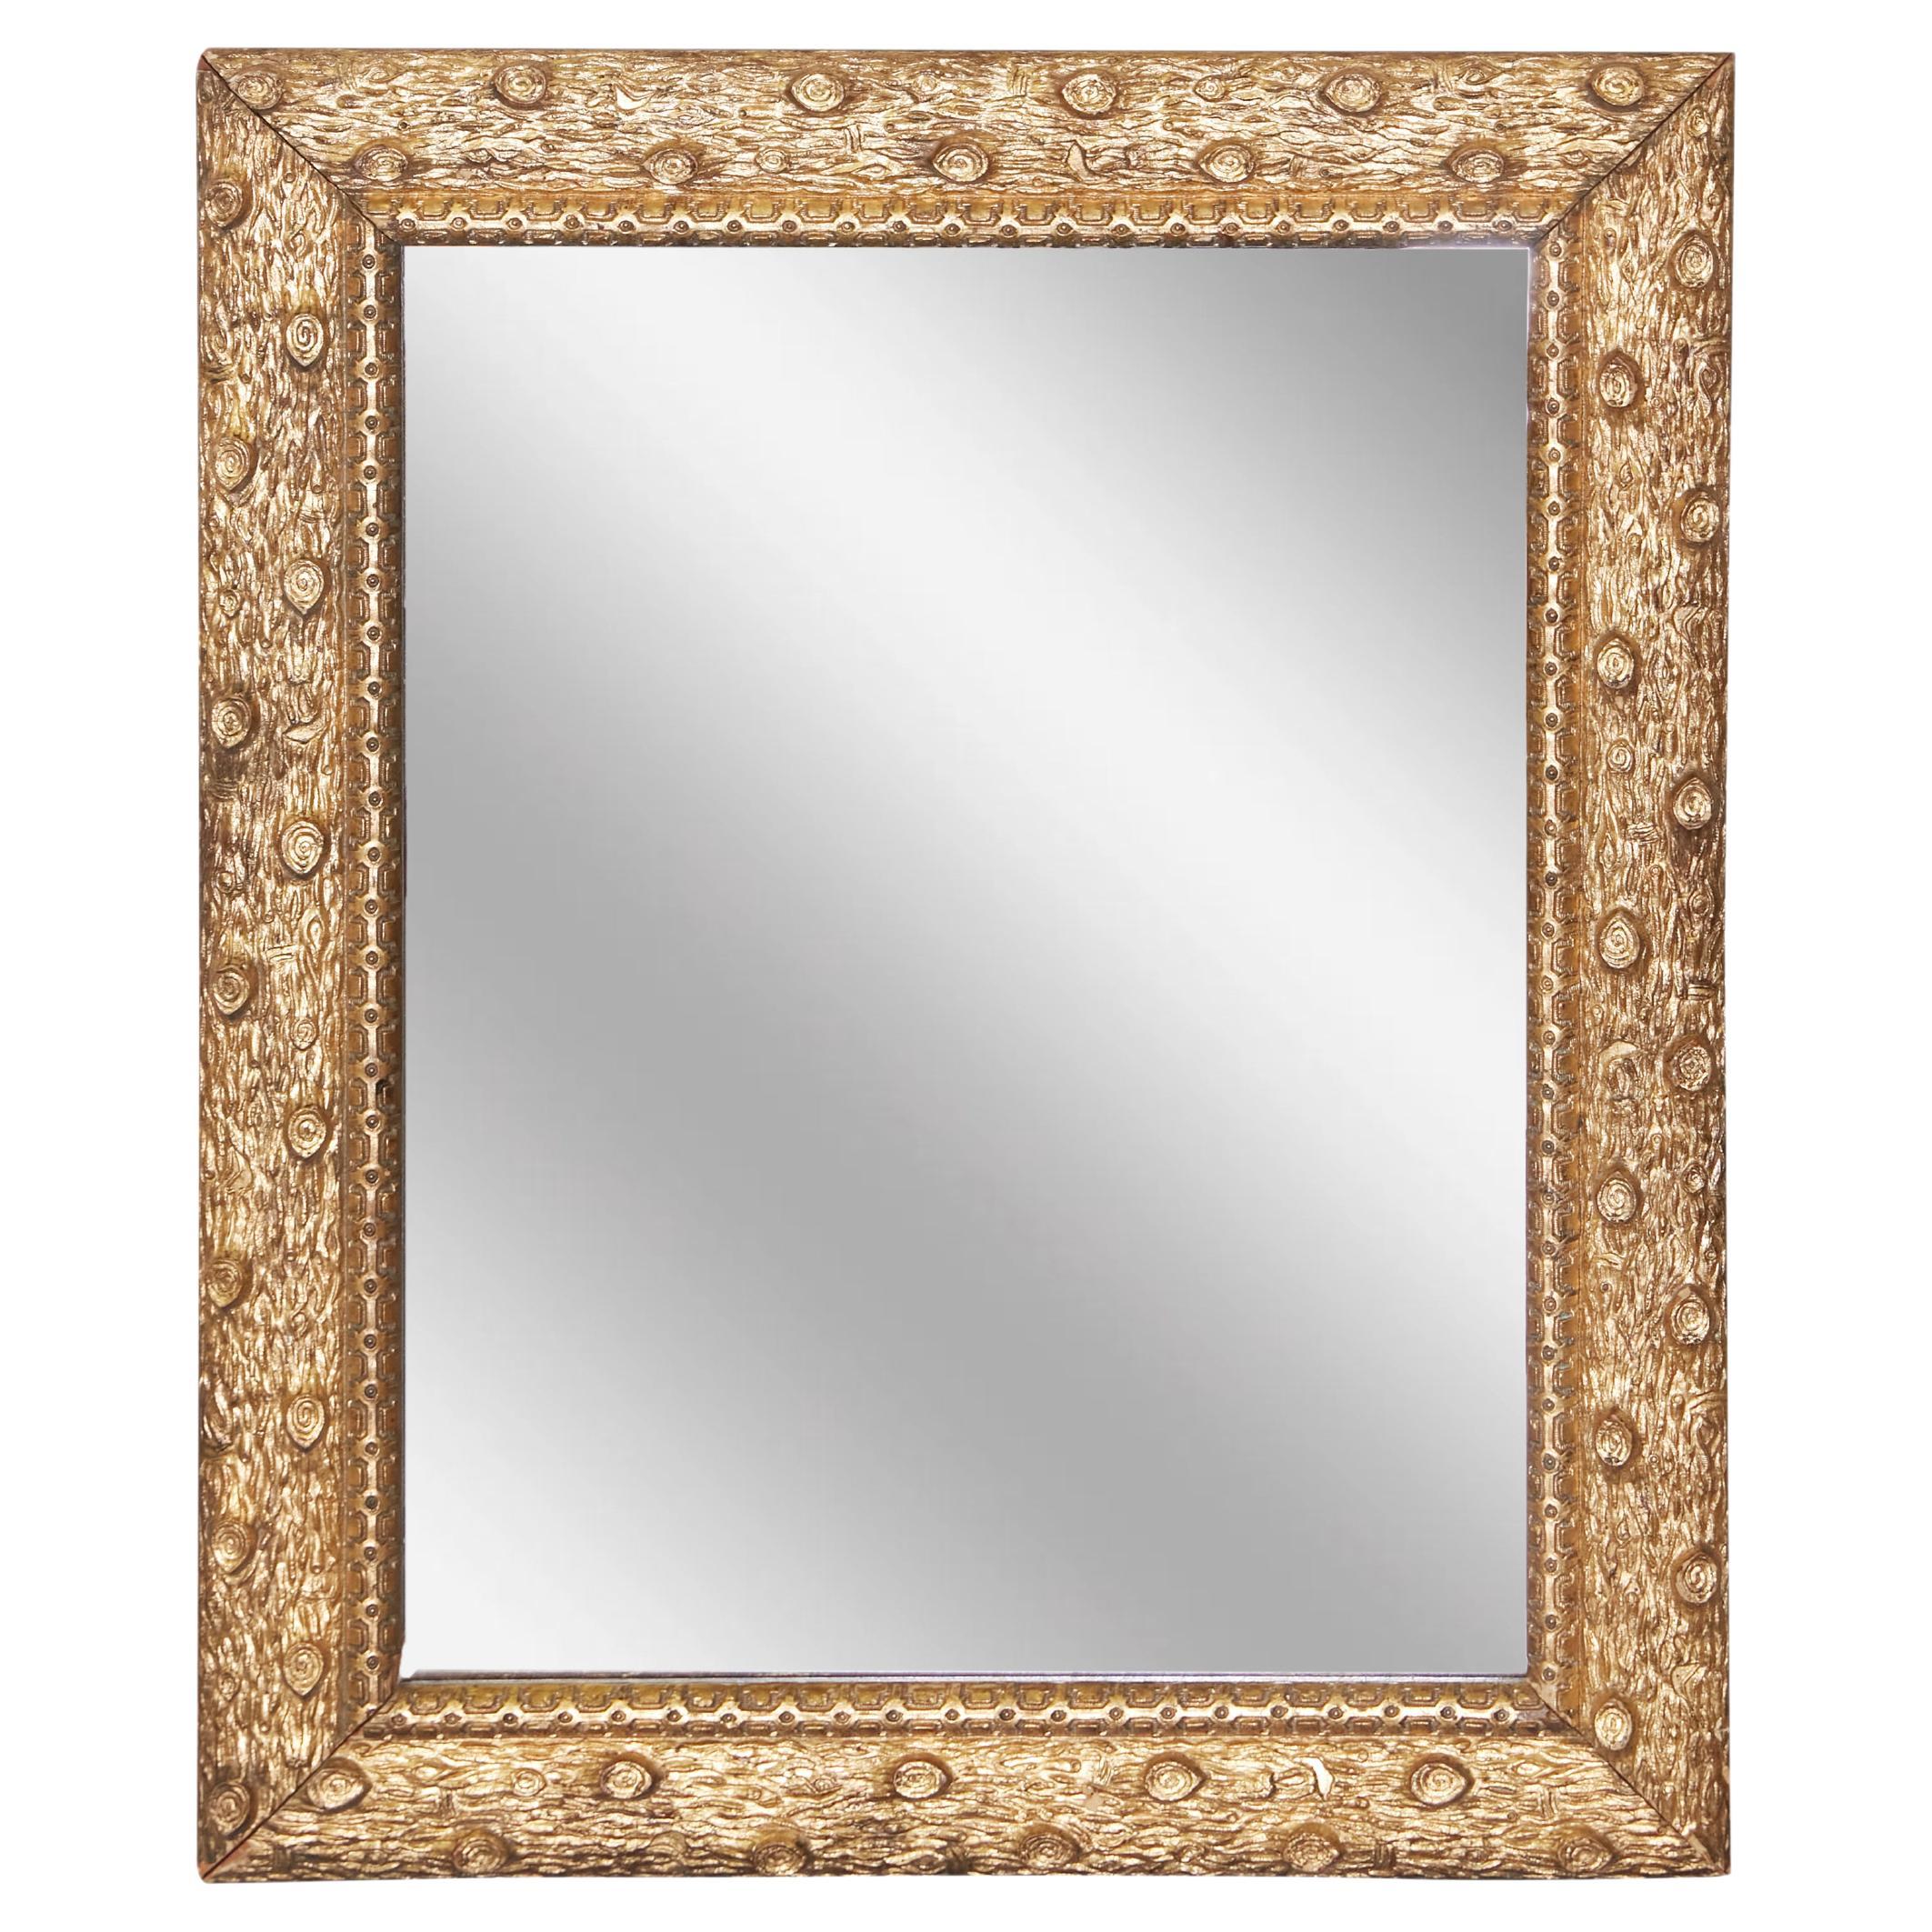 French 1920s Giltwood Rectangular Mirror with Carved Faux-Bois Décor